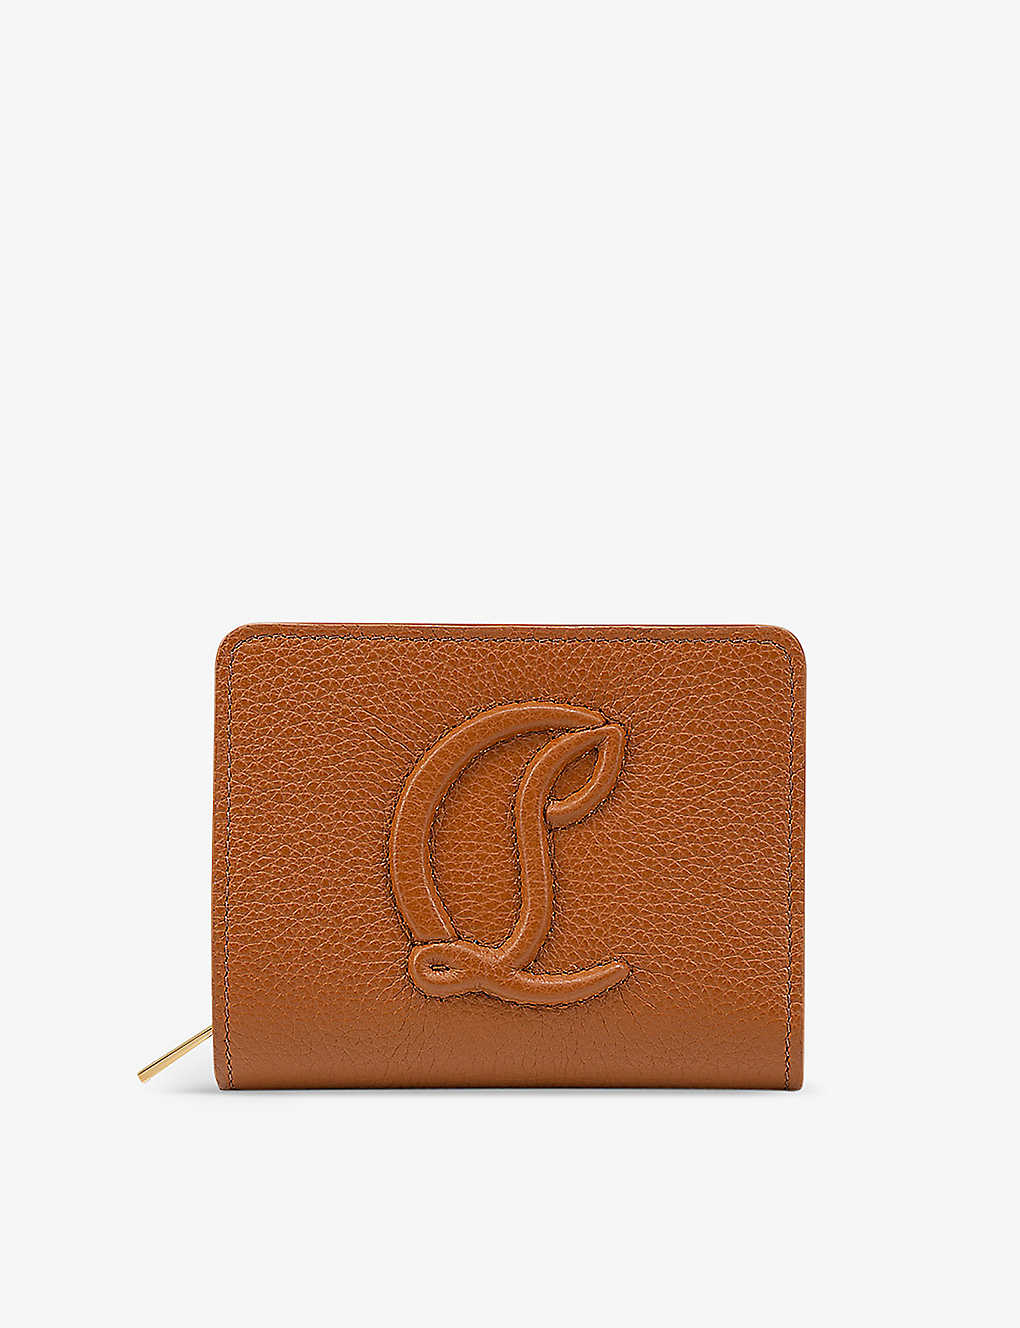 Christian Louboutin Womens Cuoio By My Side Leather Wallet